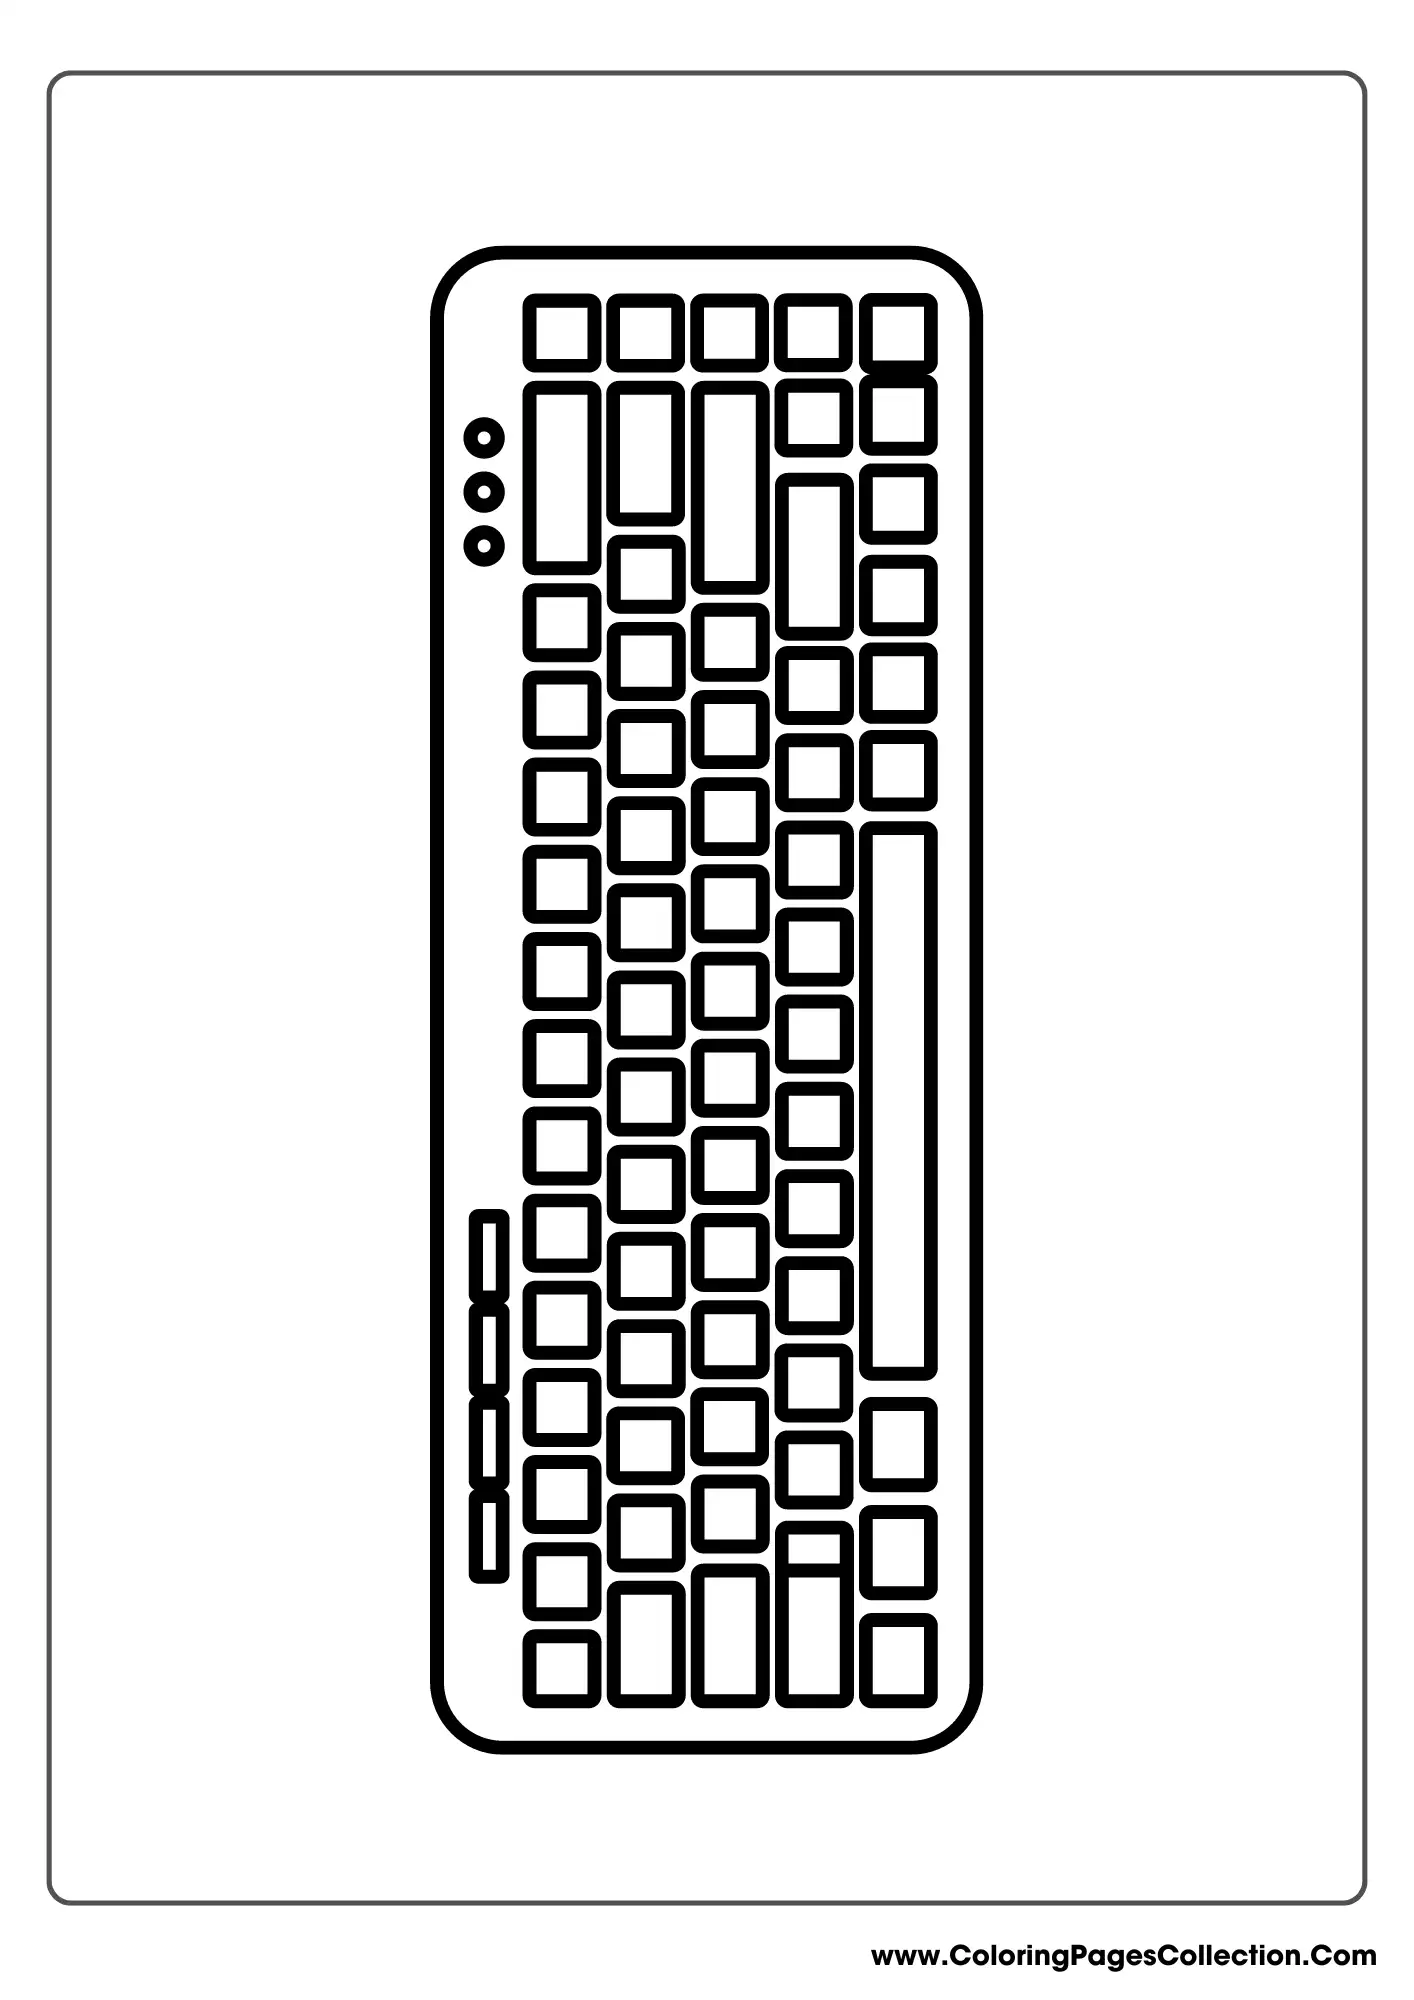 Keyboard, Computer coloring pages